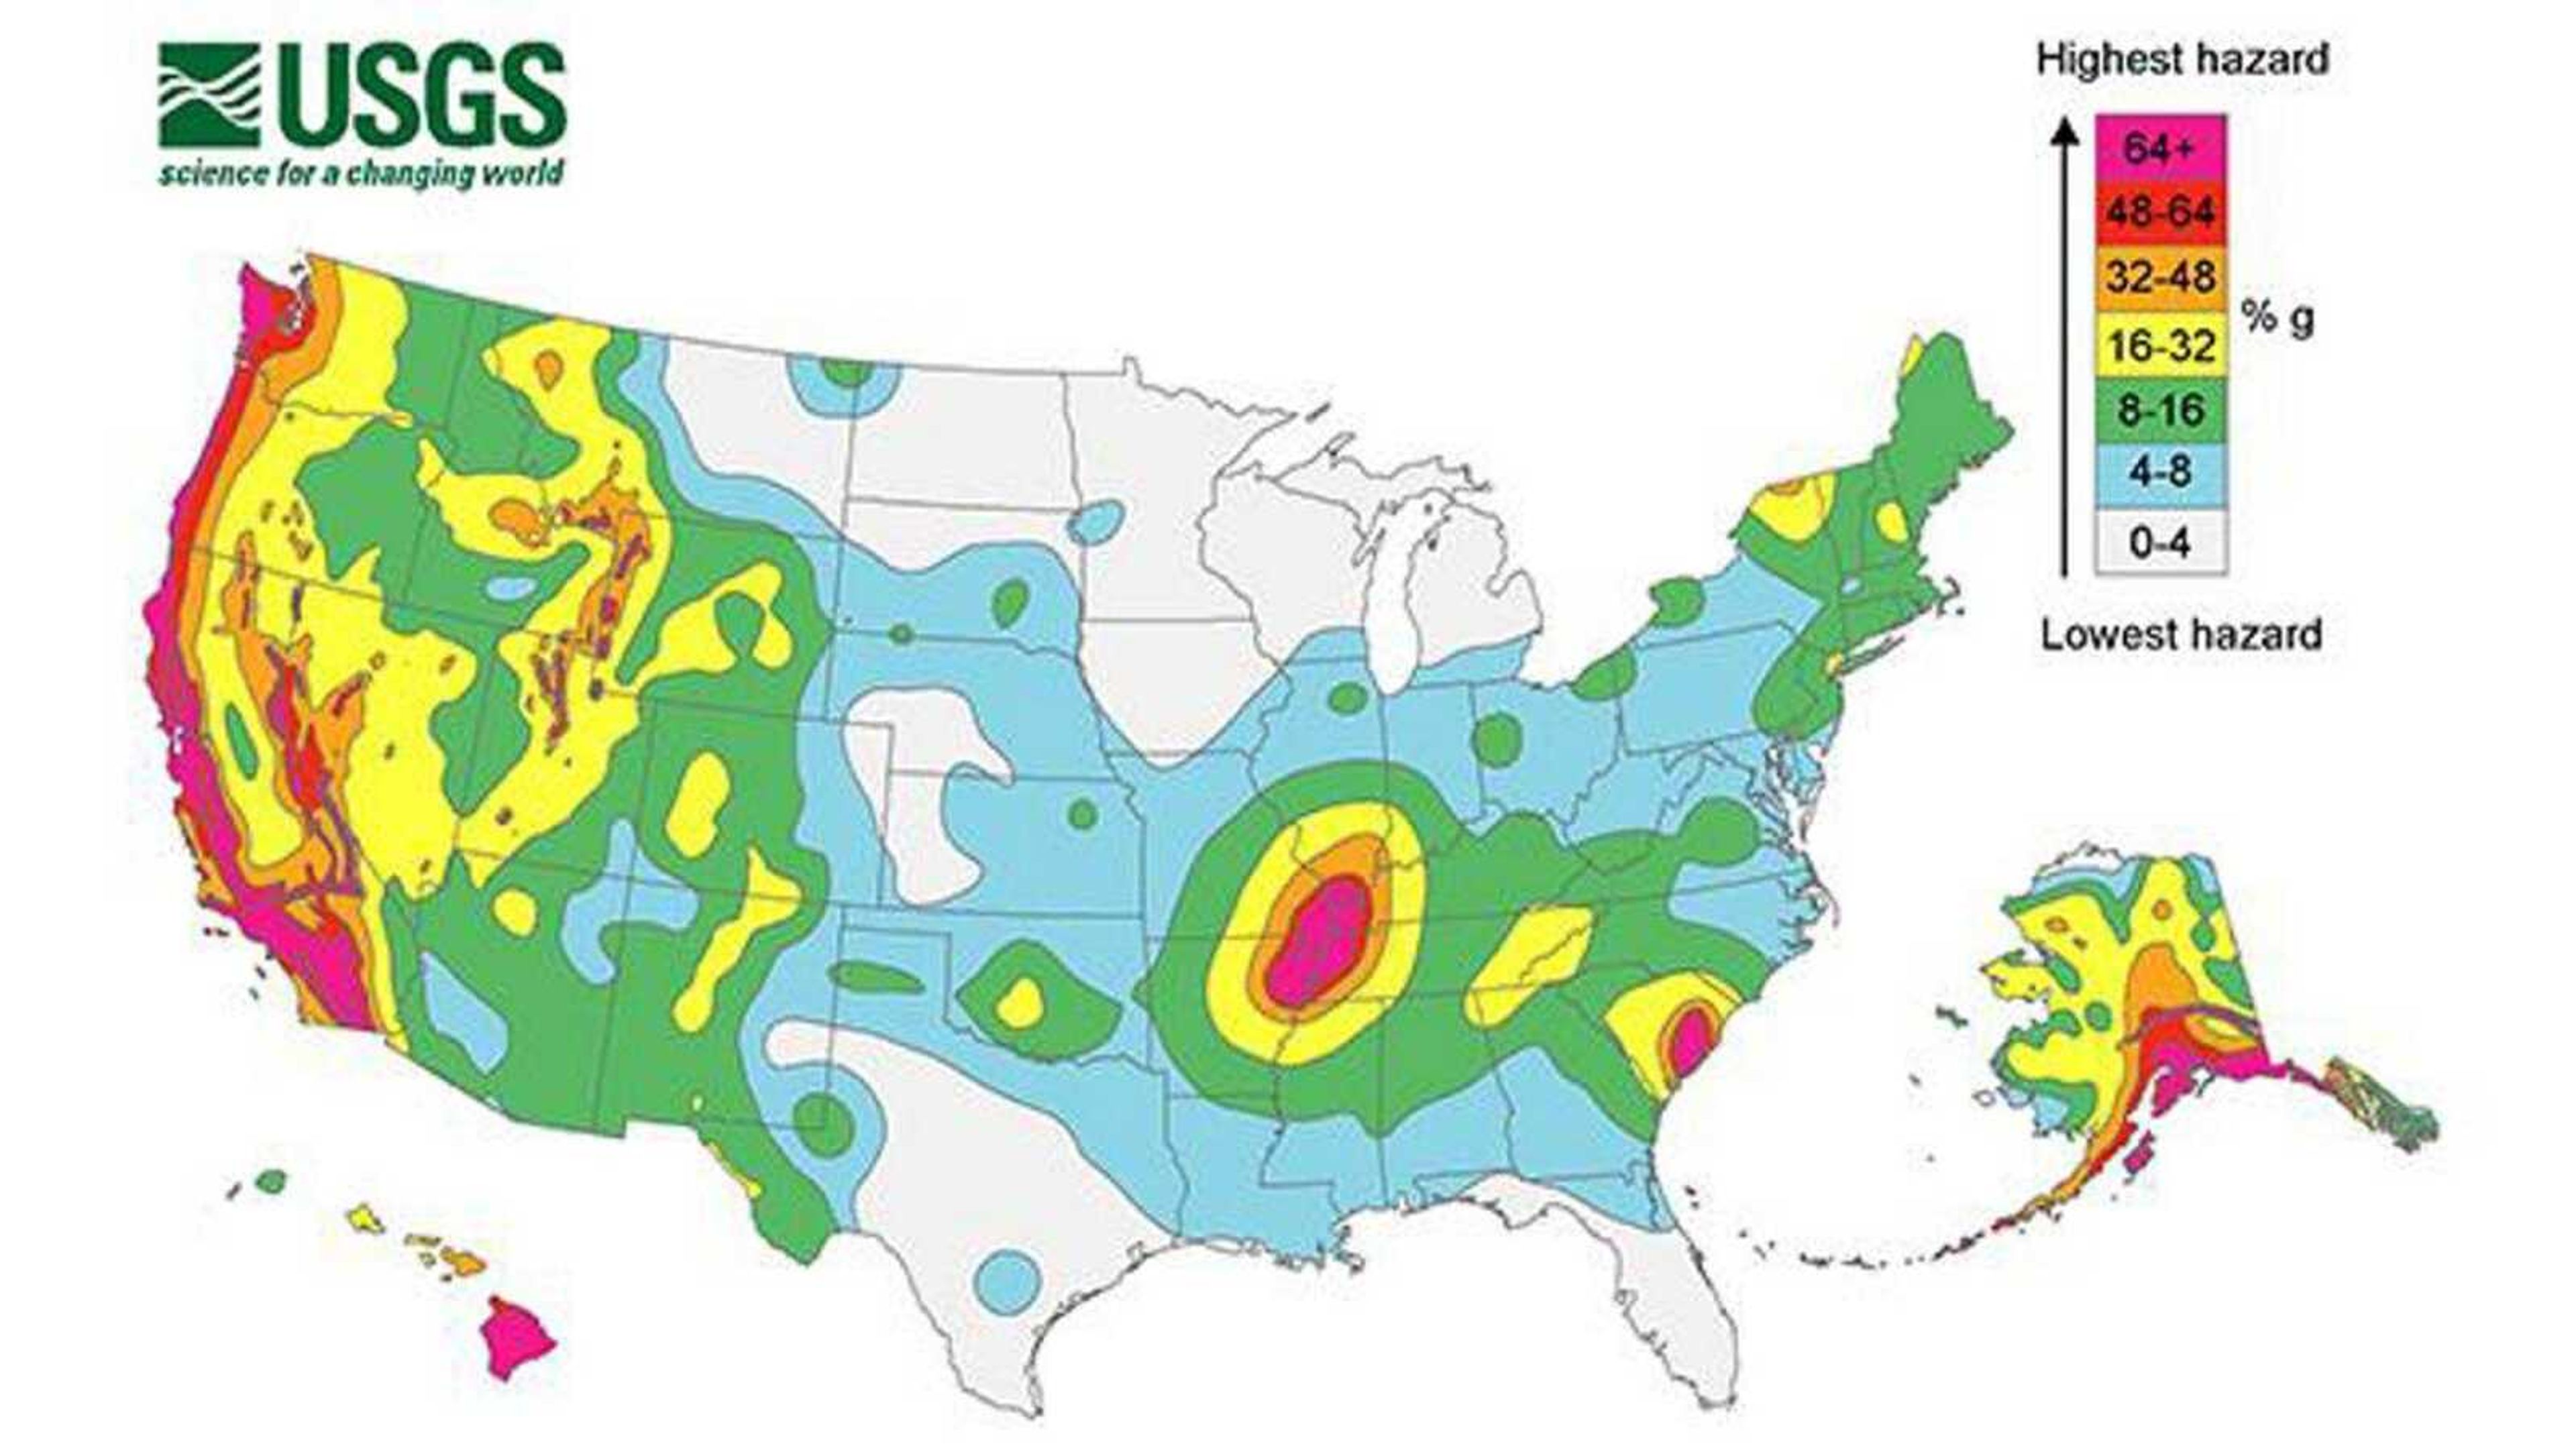 The New Madrid Seismic Zone is located in southeastern Missouri and experiences 200 microquakes every year. Map from infowars.com